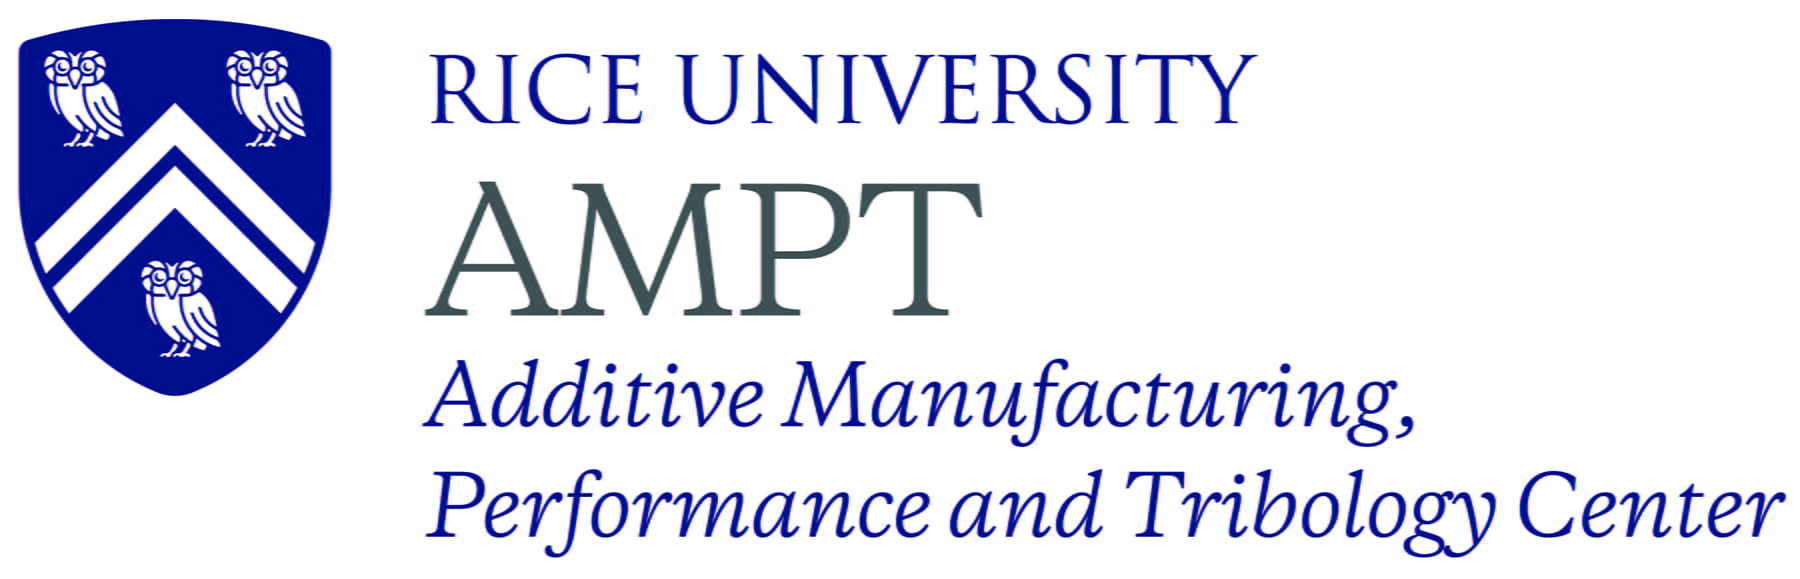 Additive Manufacturing, Performance, and Tribology (AMPT) Center at Rice University